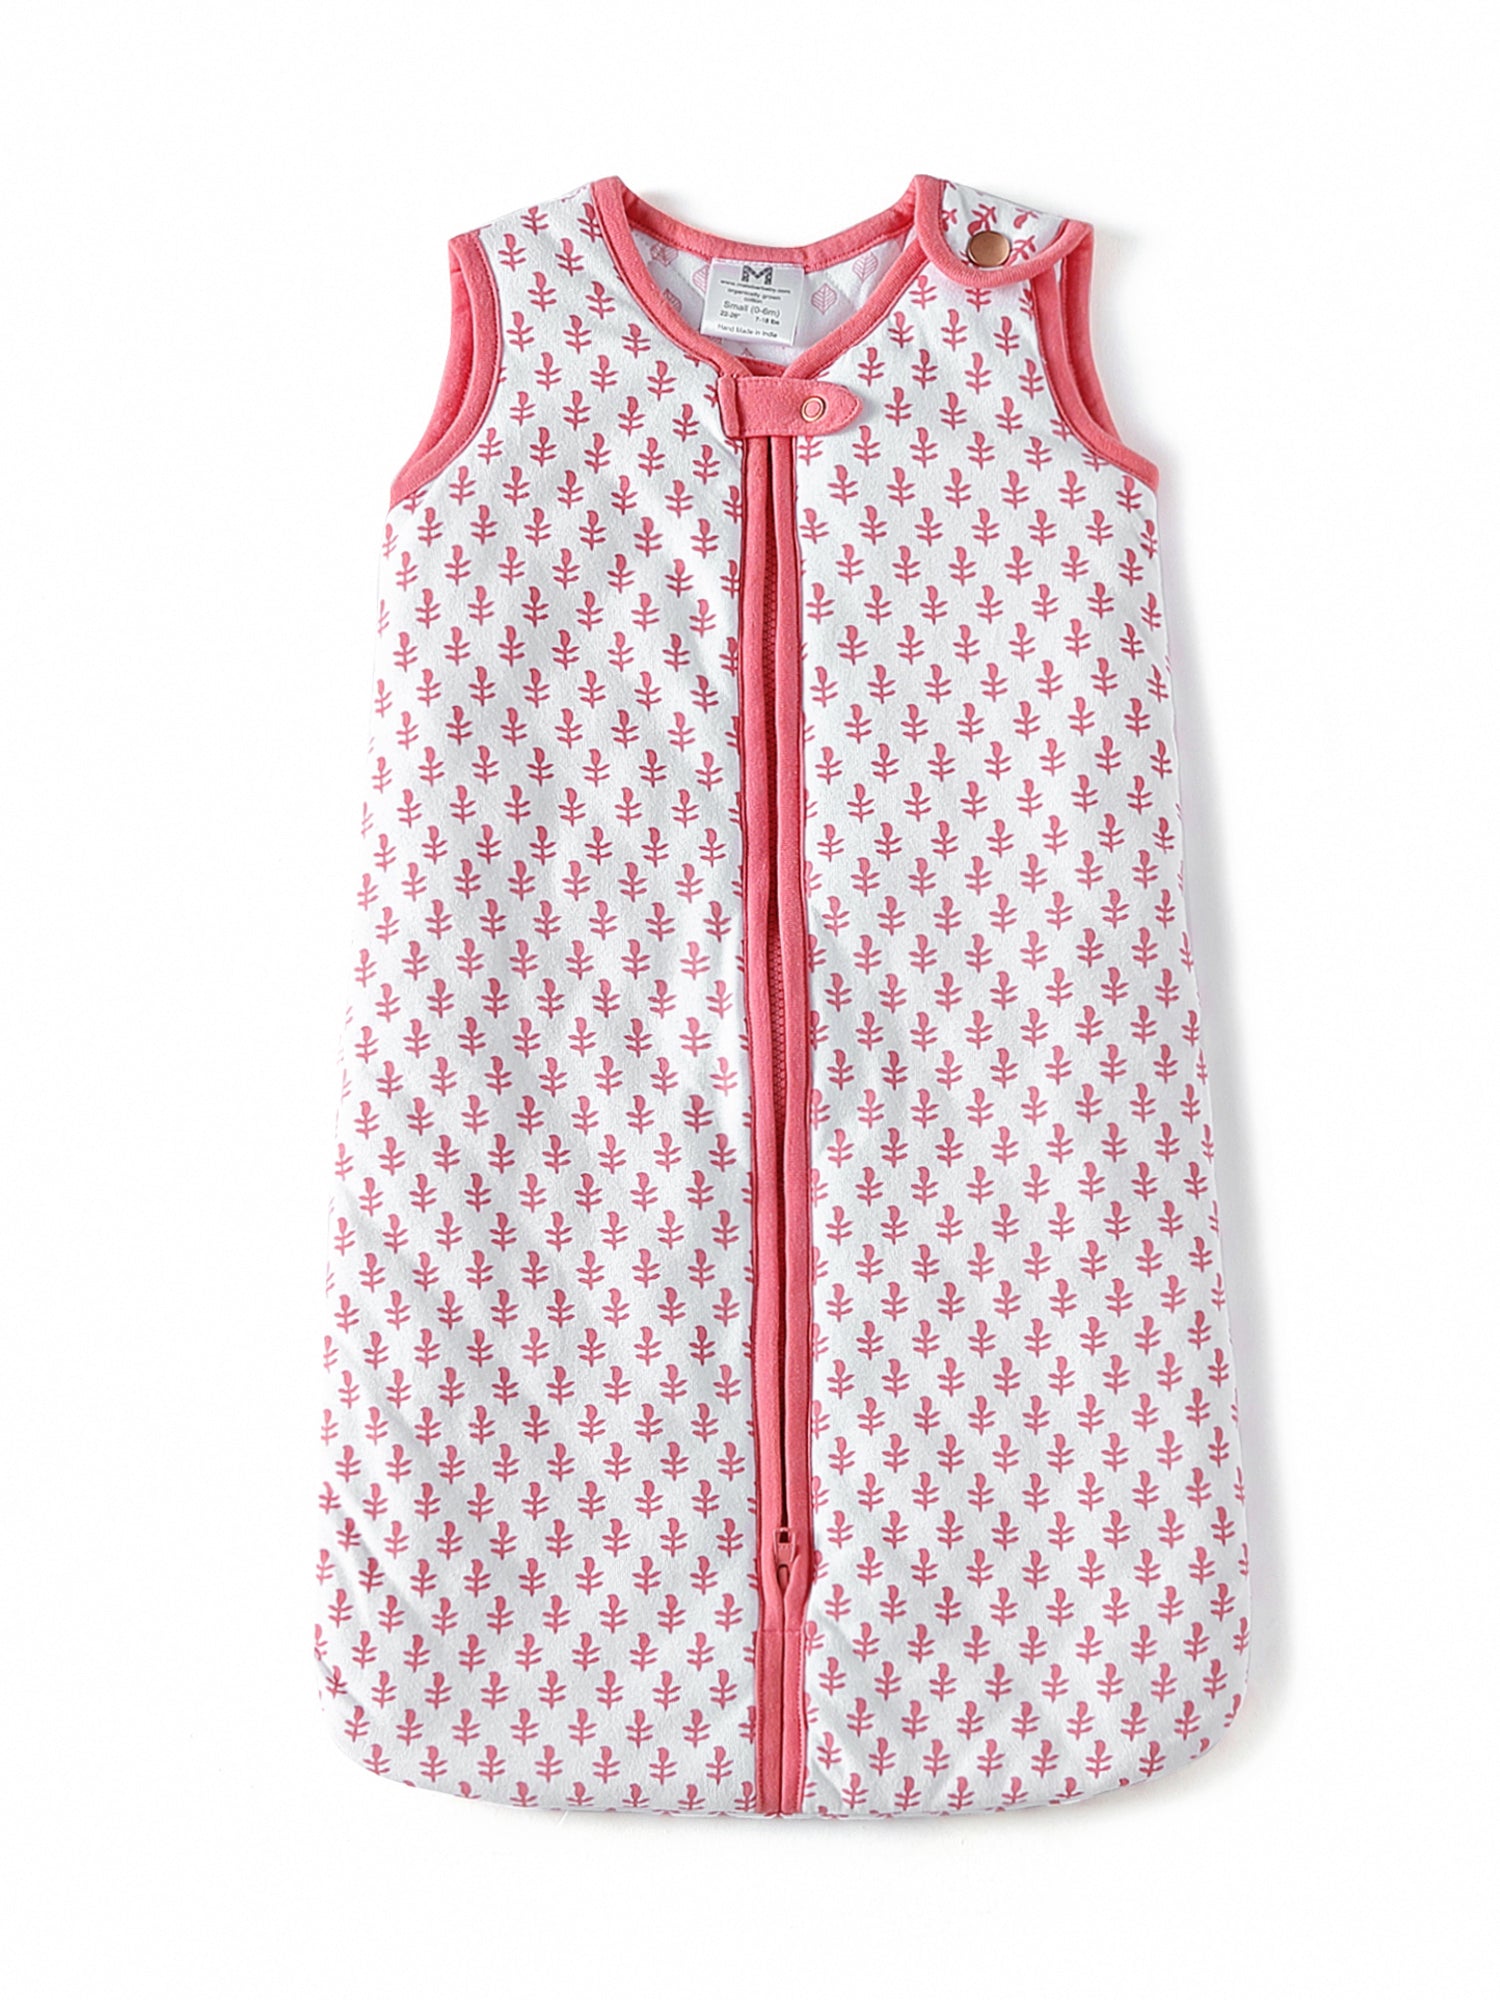 TOG 2.2 (Quilted) - Pink City Wearable Baby Sleep Sack